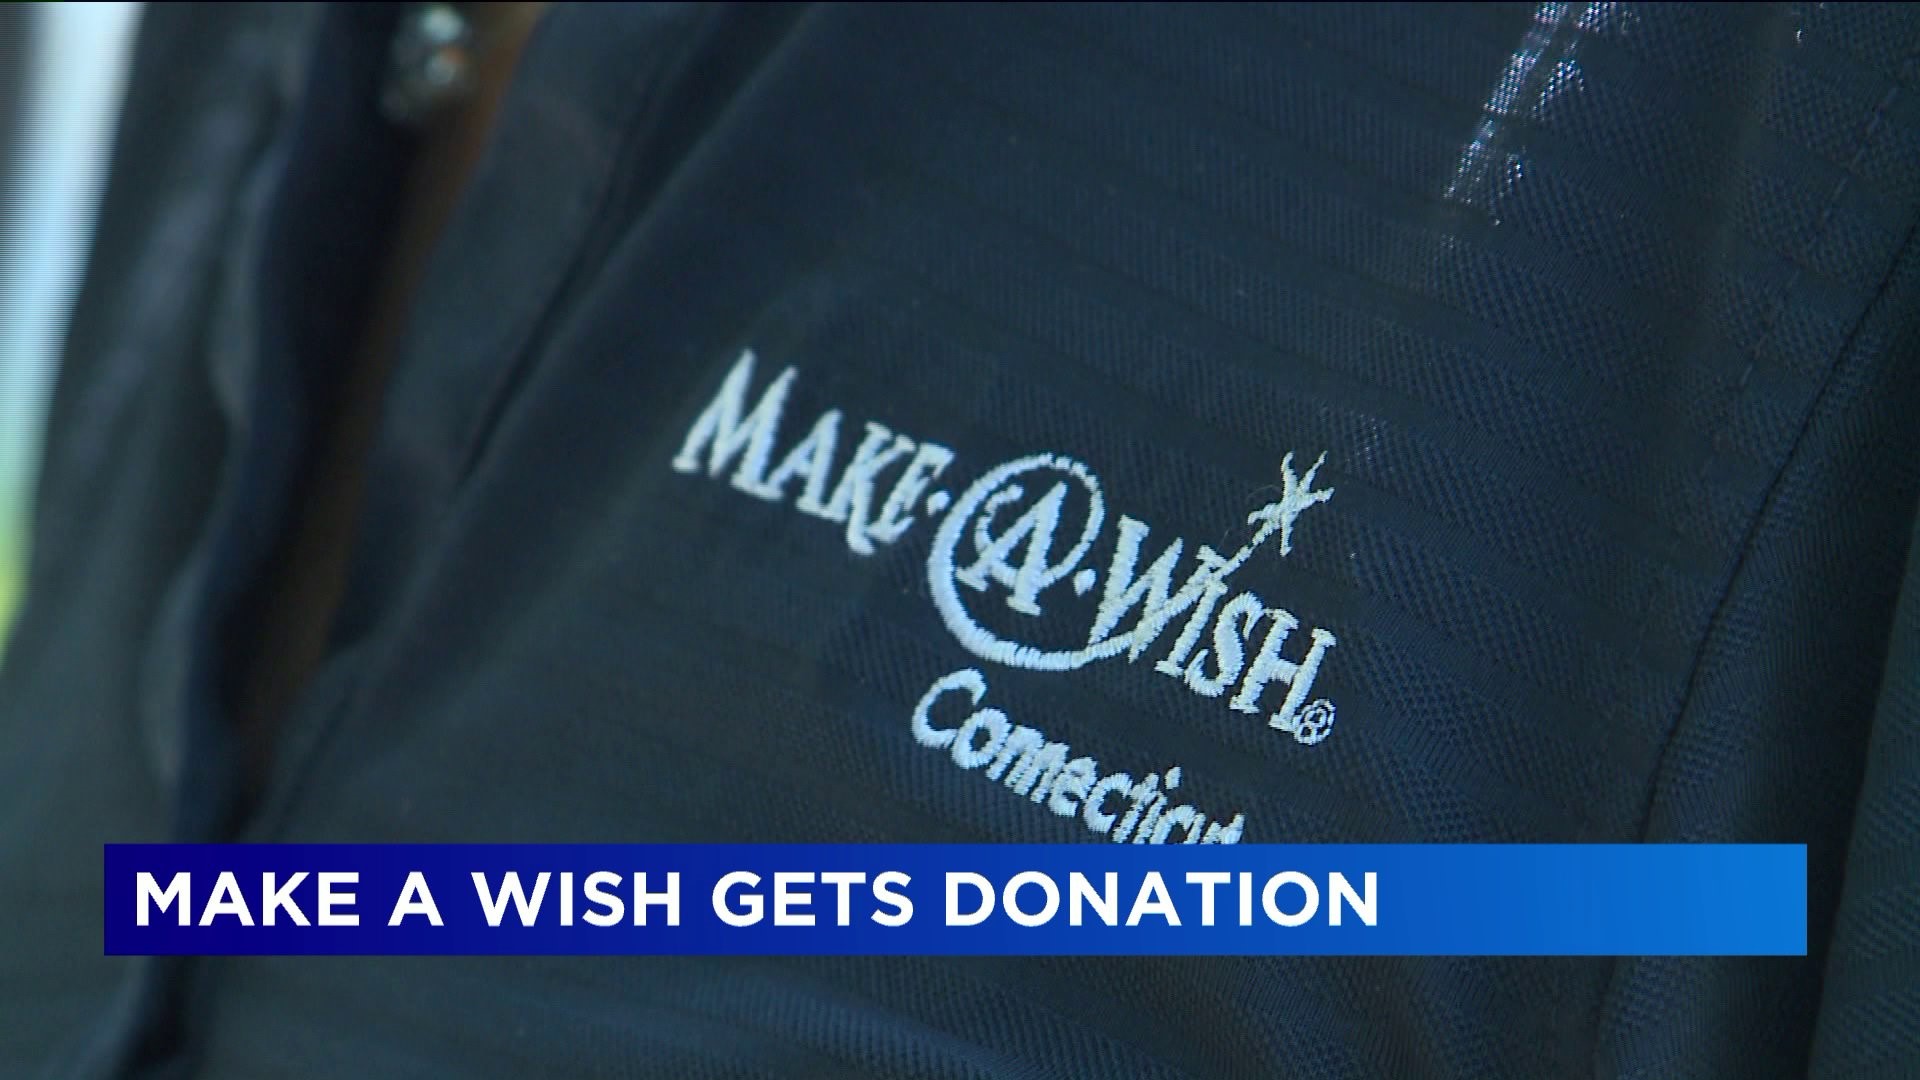 Make a Wish Connecticut: Donation helps keep wishes going